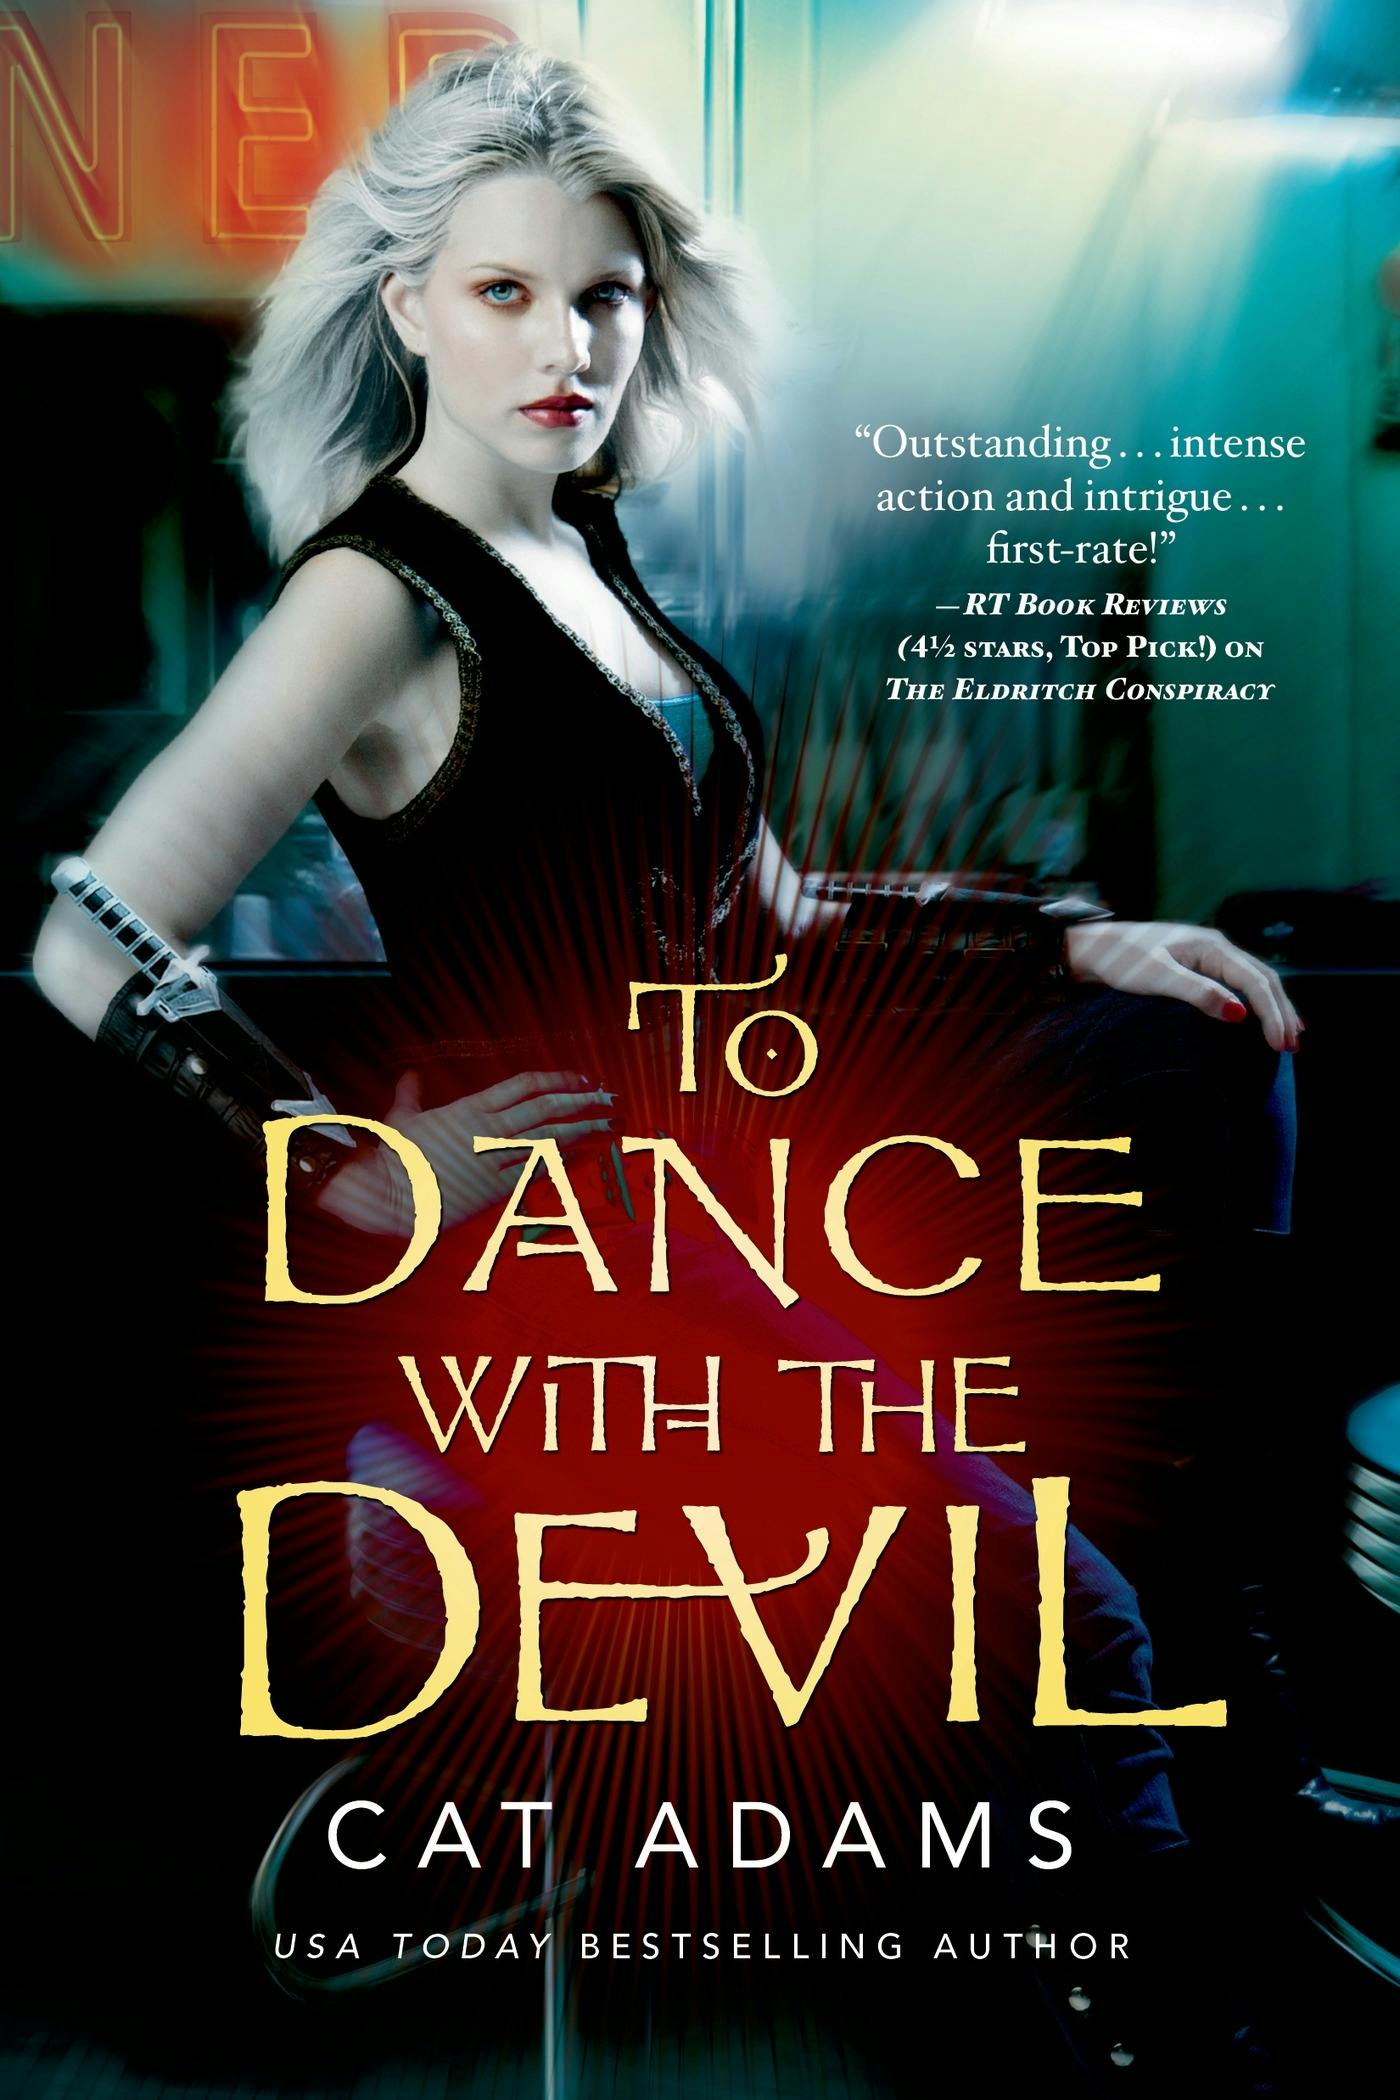 Cover for the book titled as: To Dance With the Devil